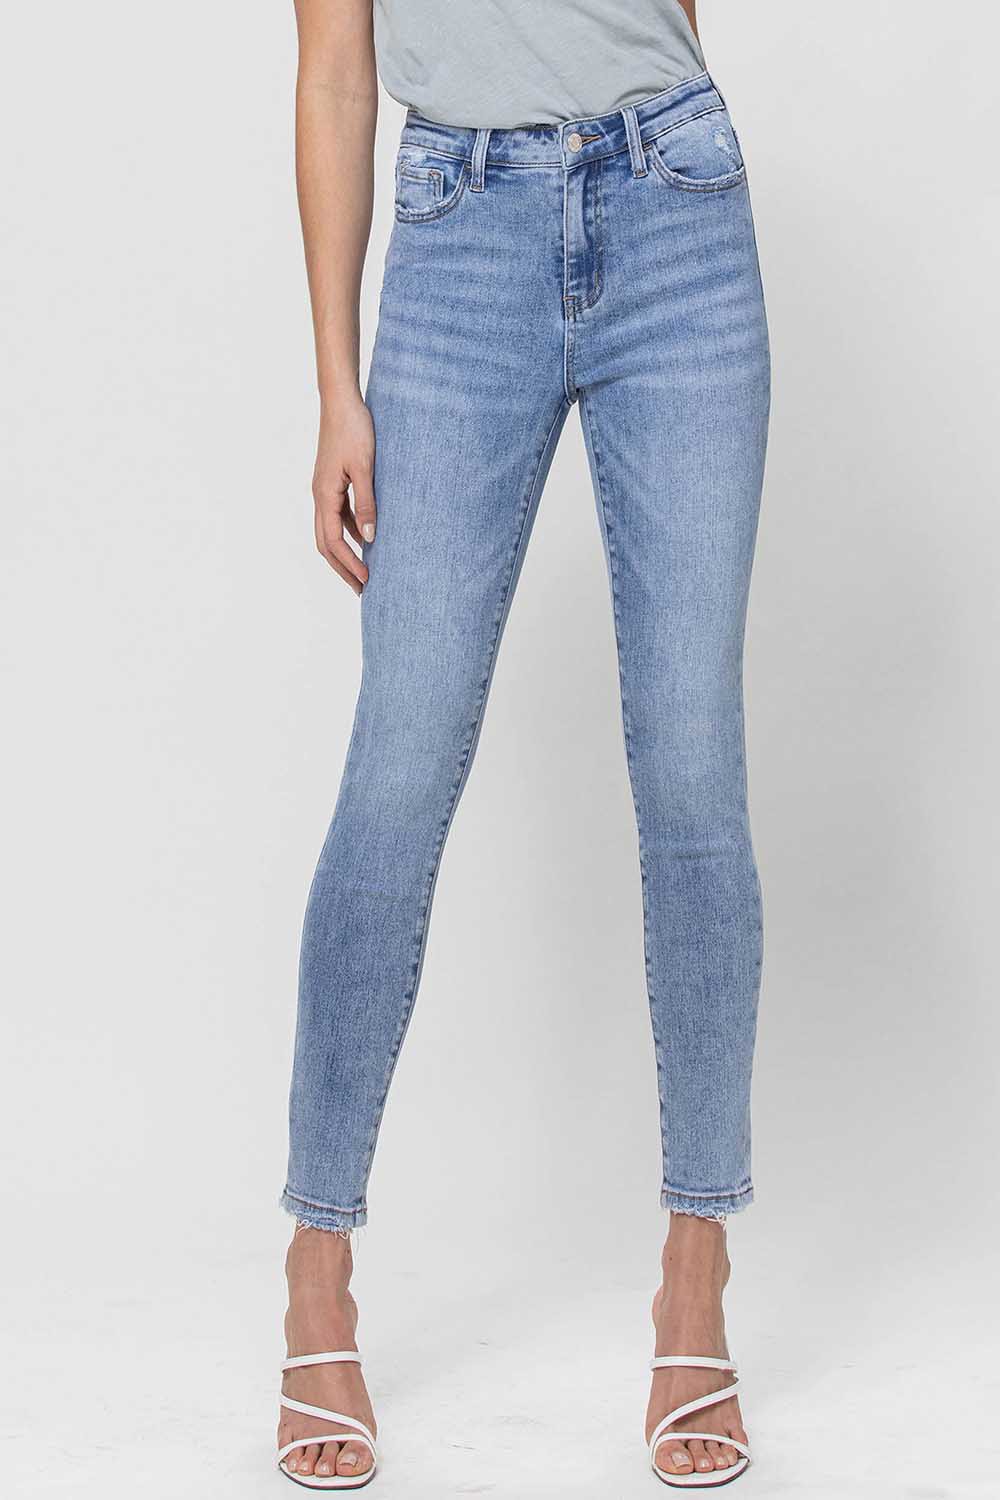 90's High Rise Skinny Jeans